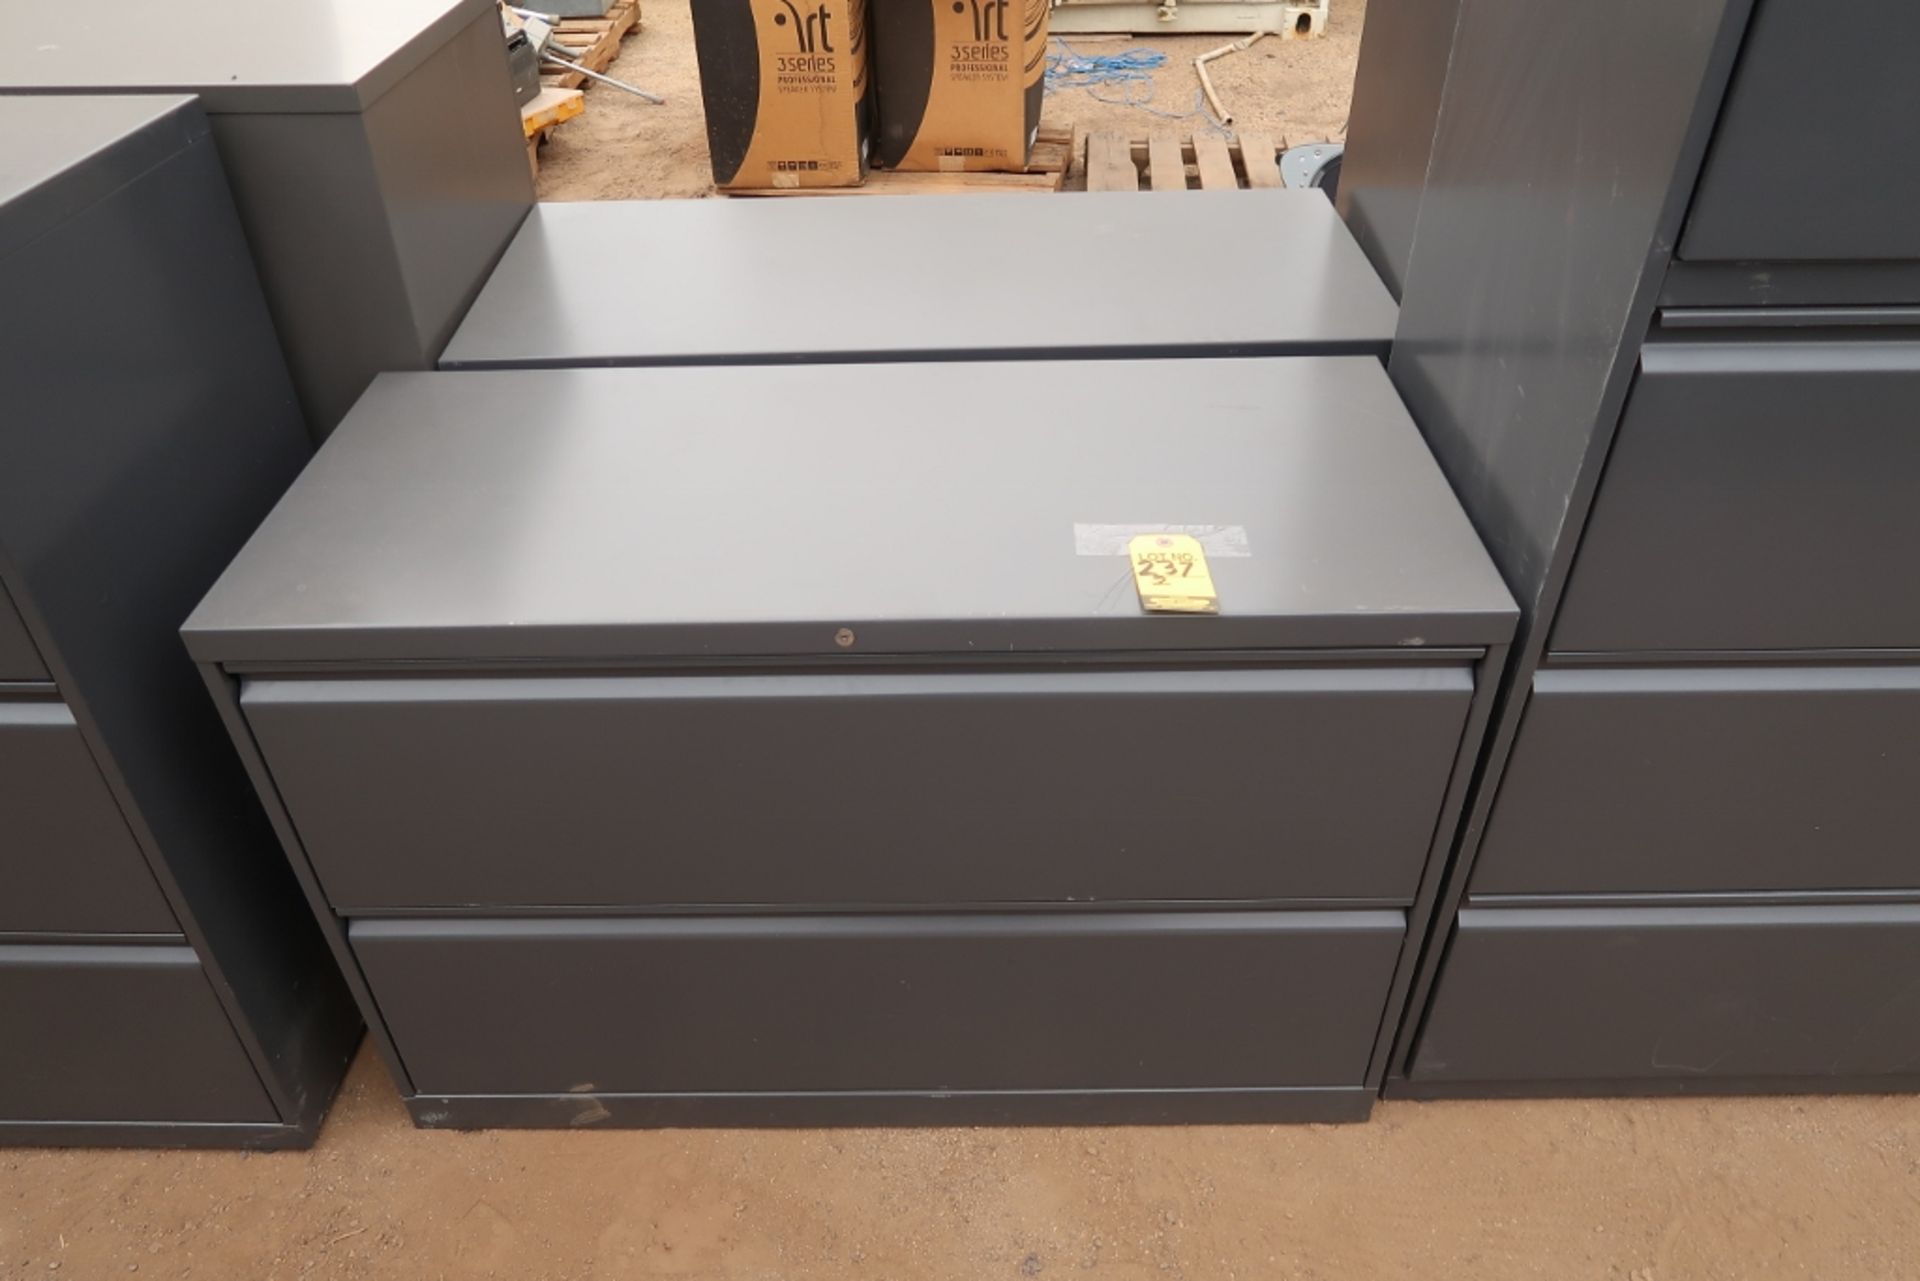 2-DR HORIZONTAL FILE CABINETS - Image 2 of 2